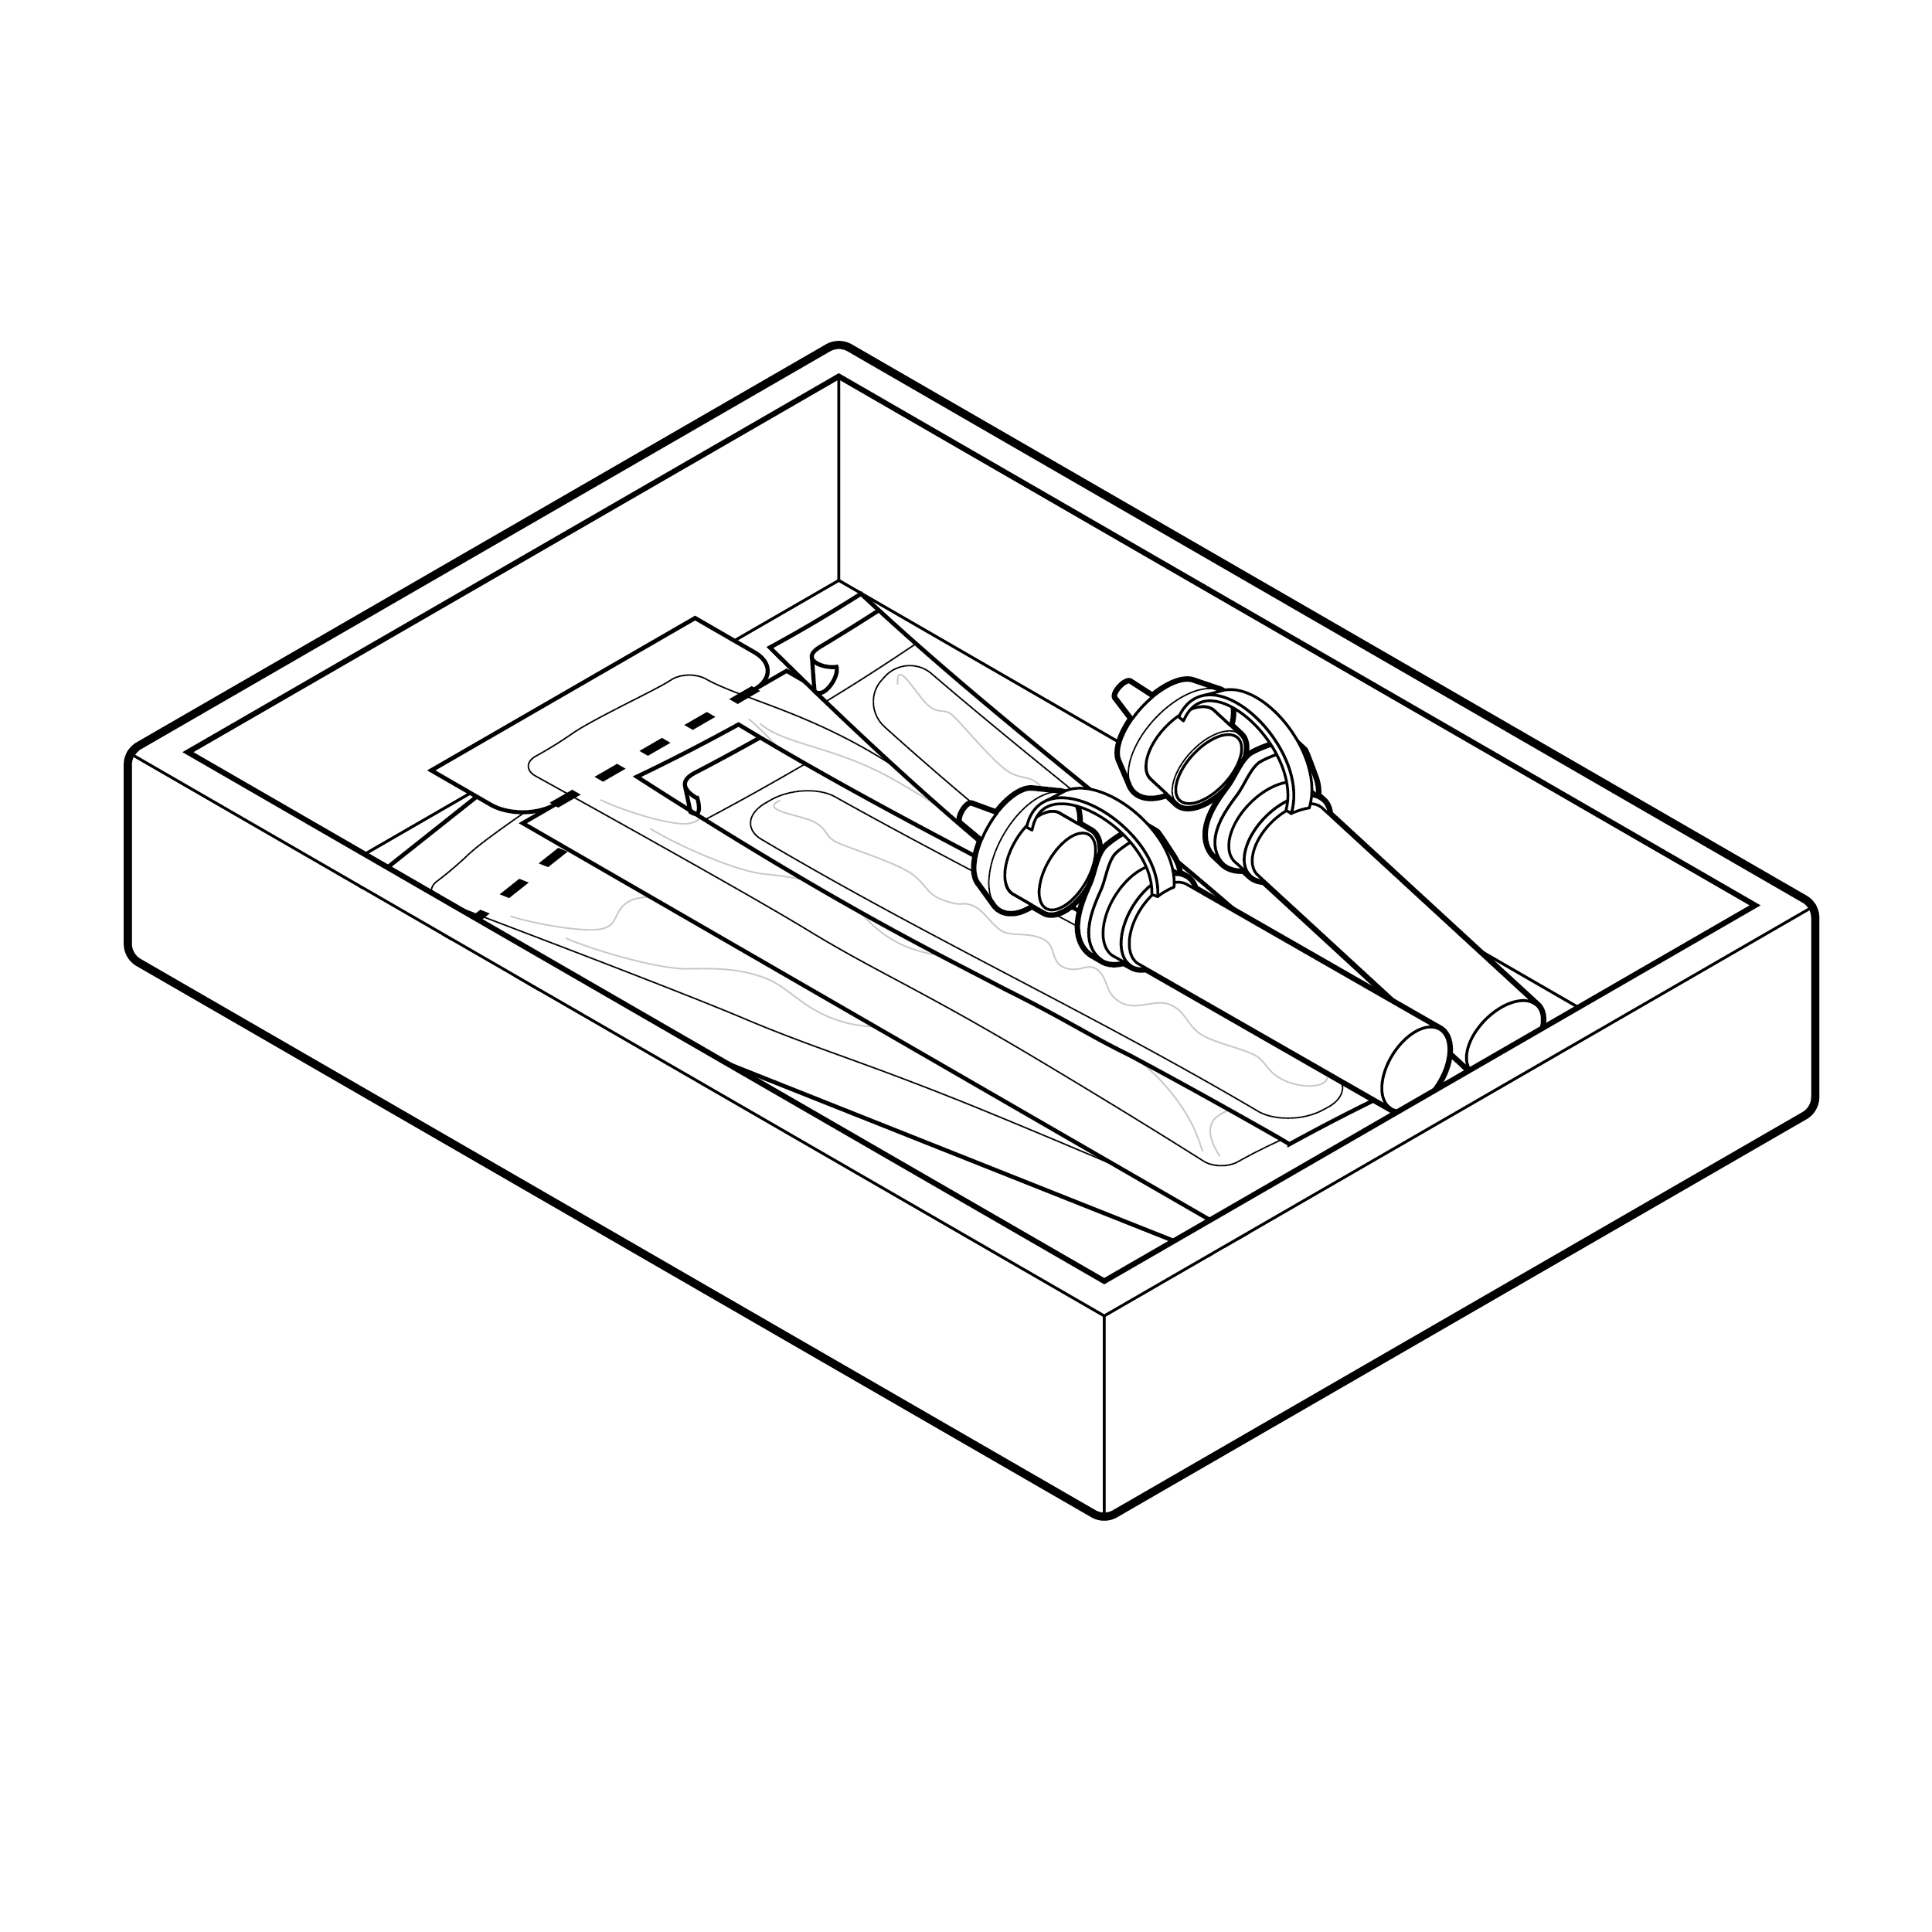 Open test kit box with loose components inside.